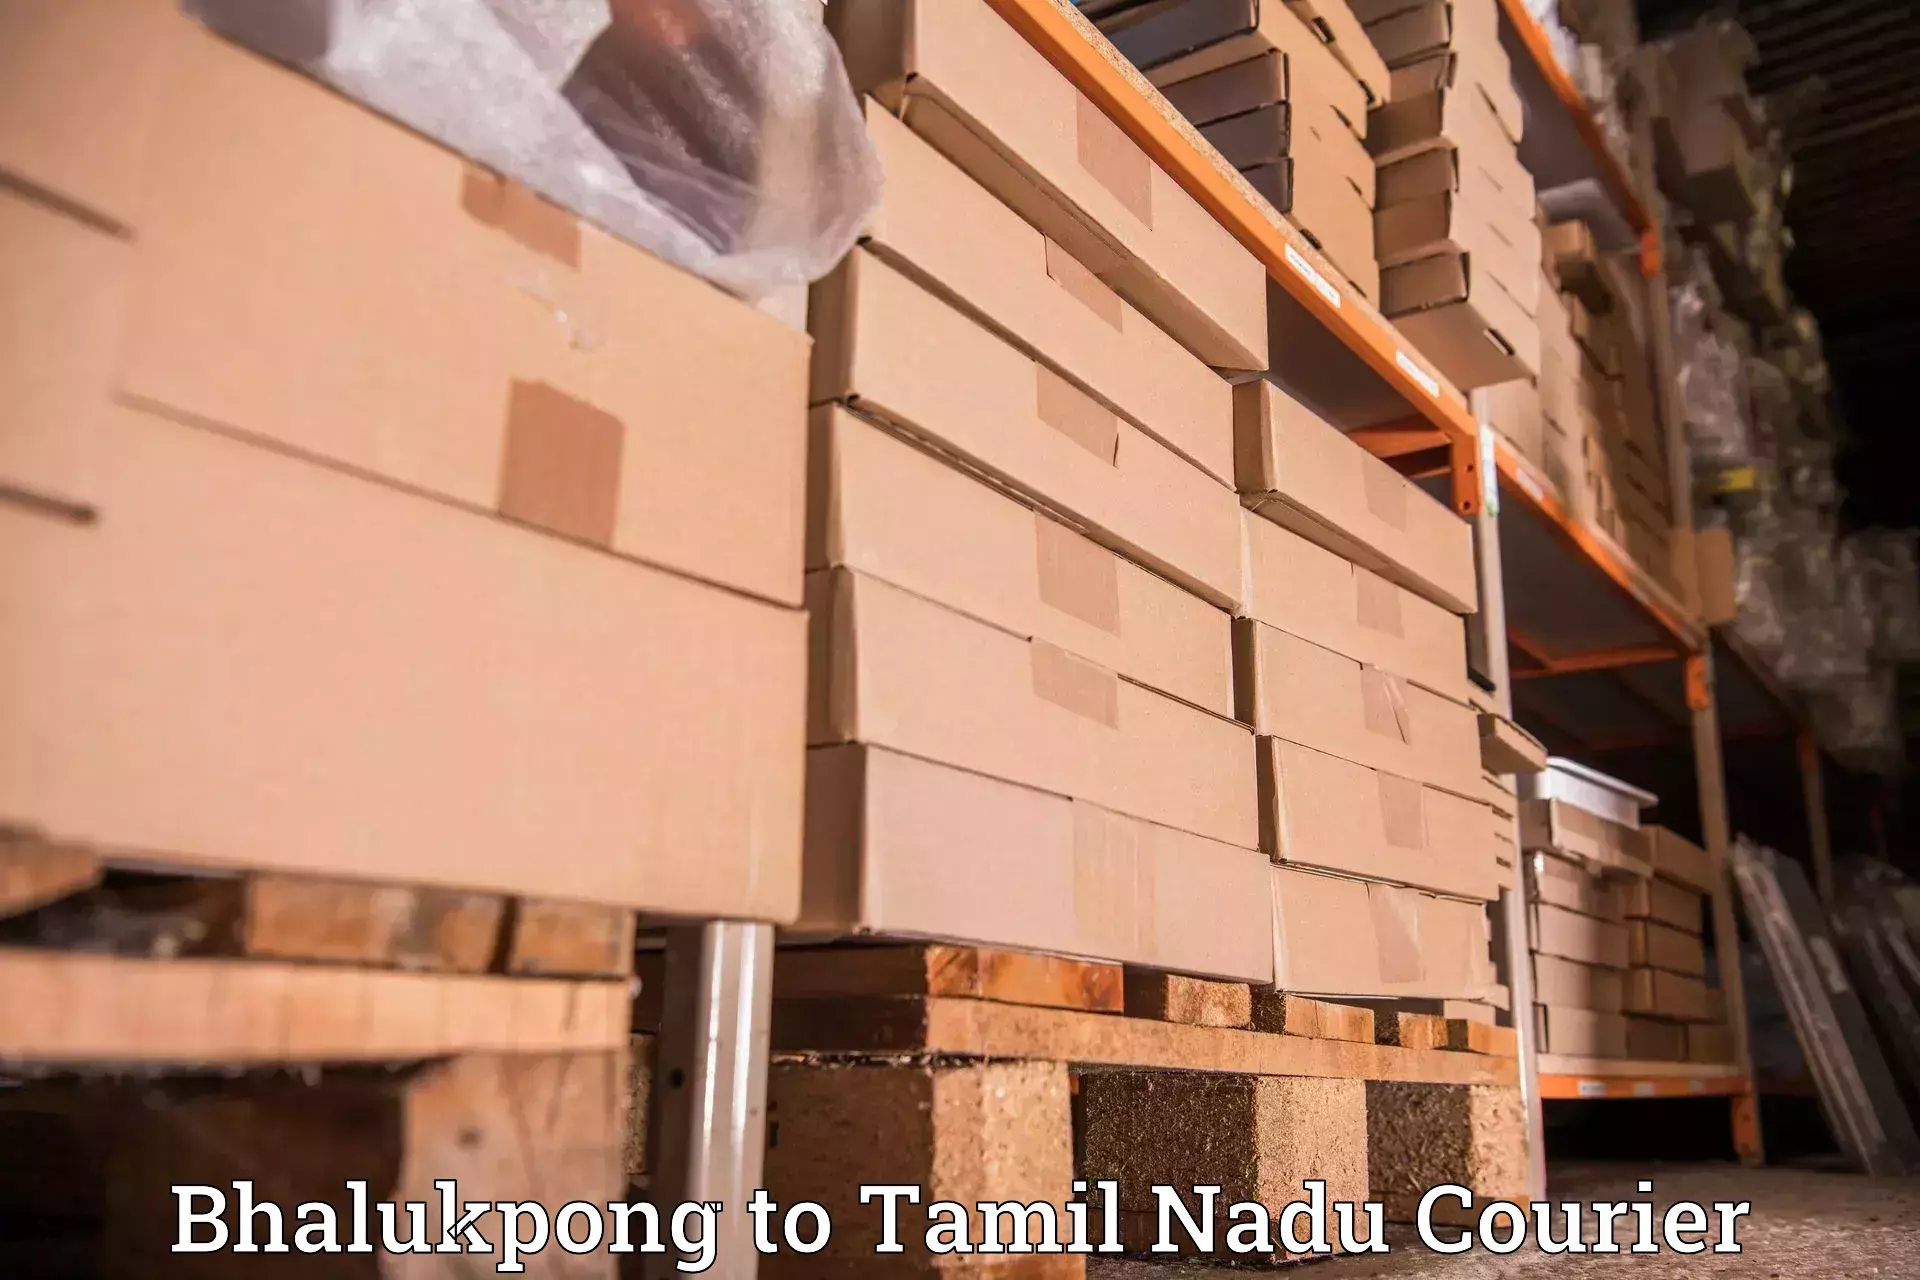 Global shipping solutions Bhalukpong to Chennai